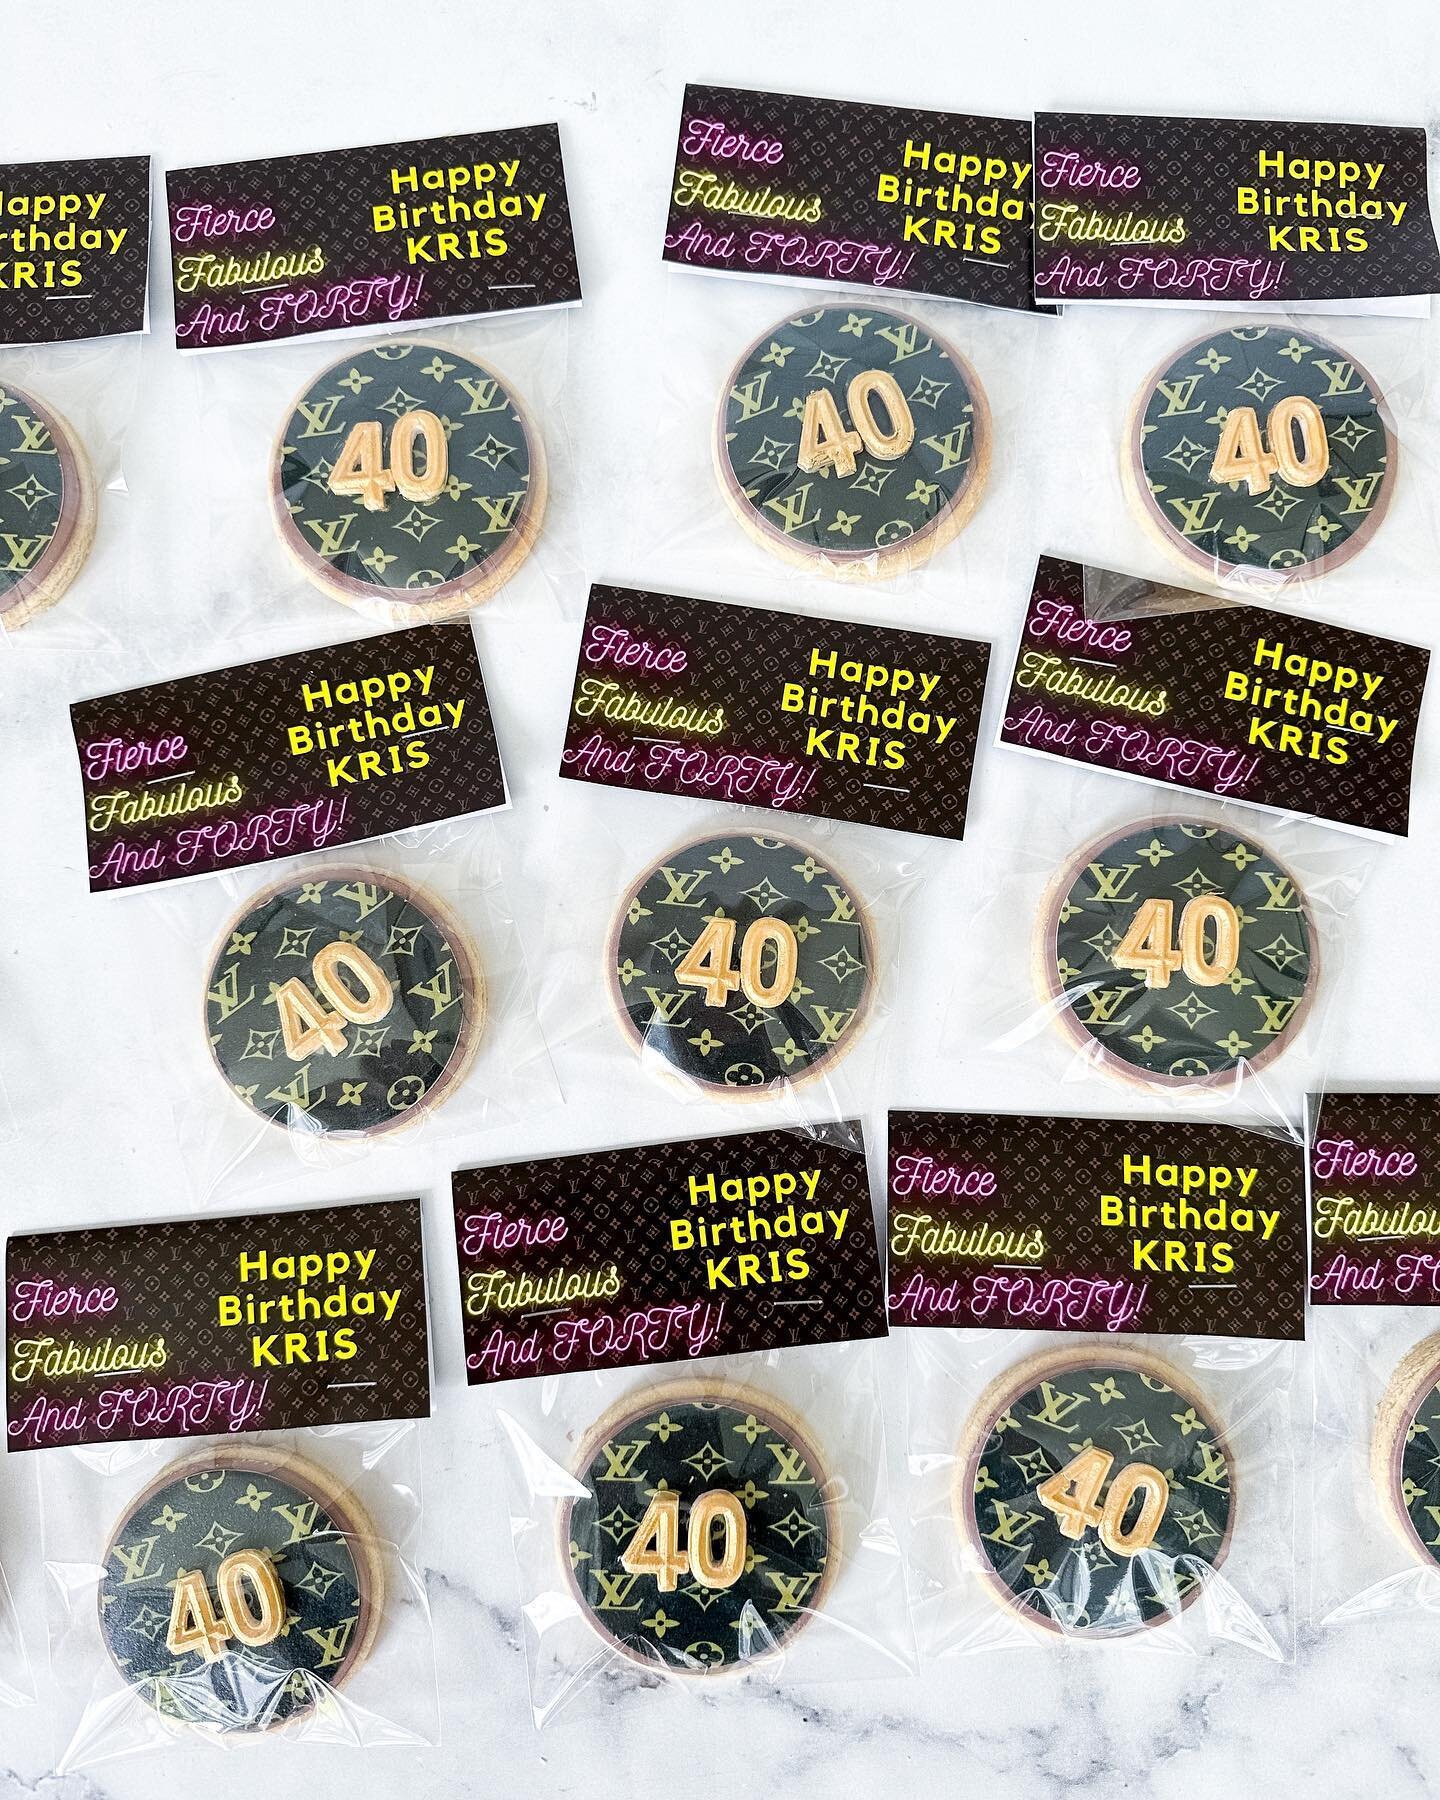 Here&rsquo;s part 2 of the 40th birthday extravaganza! What&rsquo;s a birthday without LV cookies 🤩🤩.. and introducing my latest add on.. customized bag toppers #therippedbaker #newsteadcookies #brisbanecookies #brisbanefood #supportsmallbuisness #